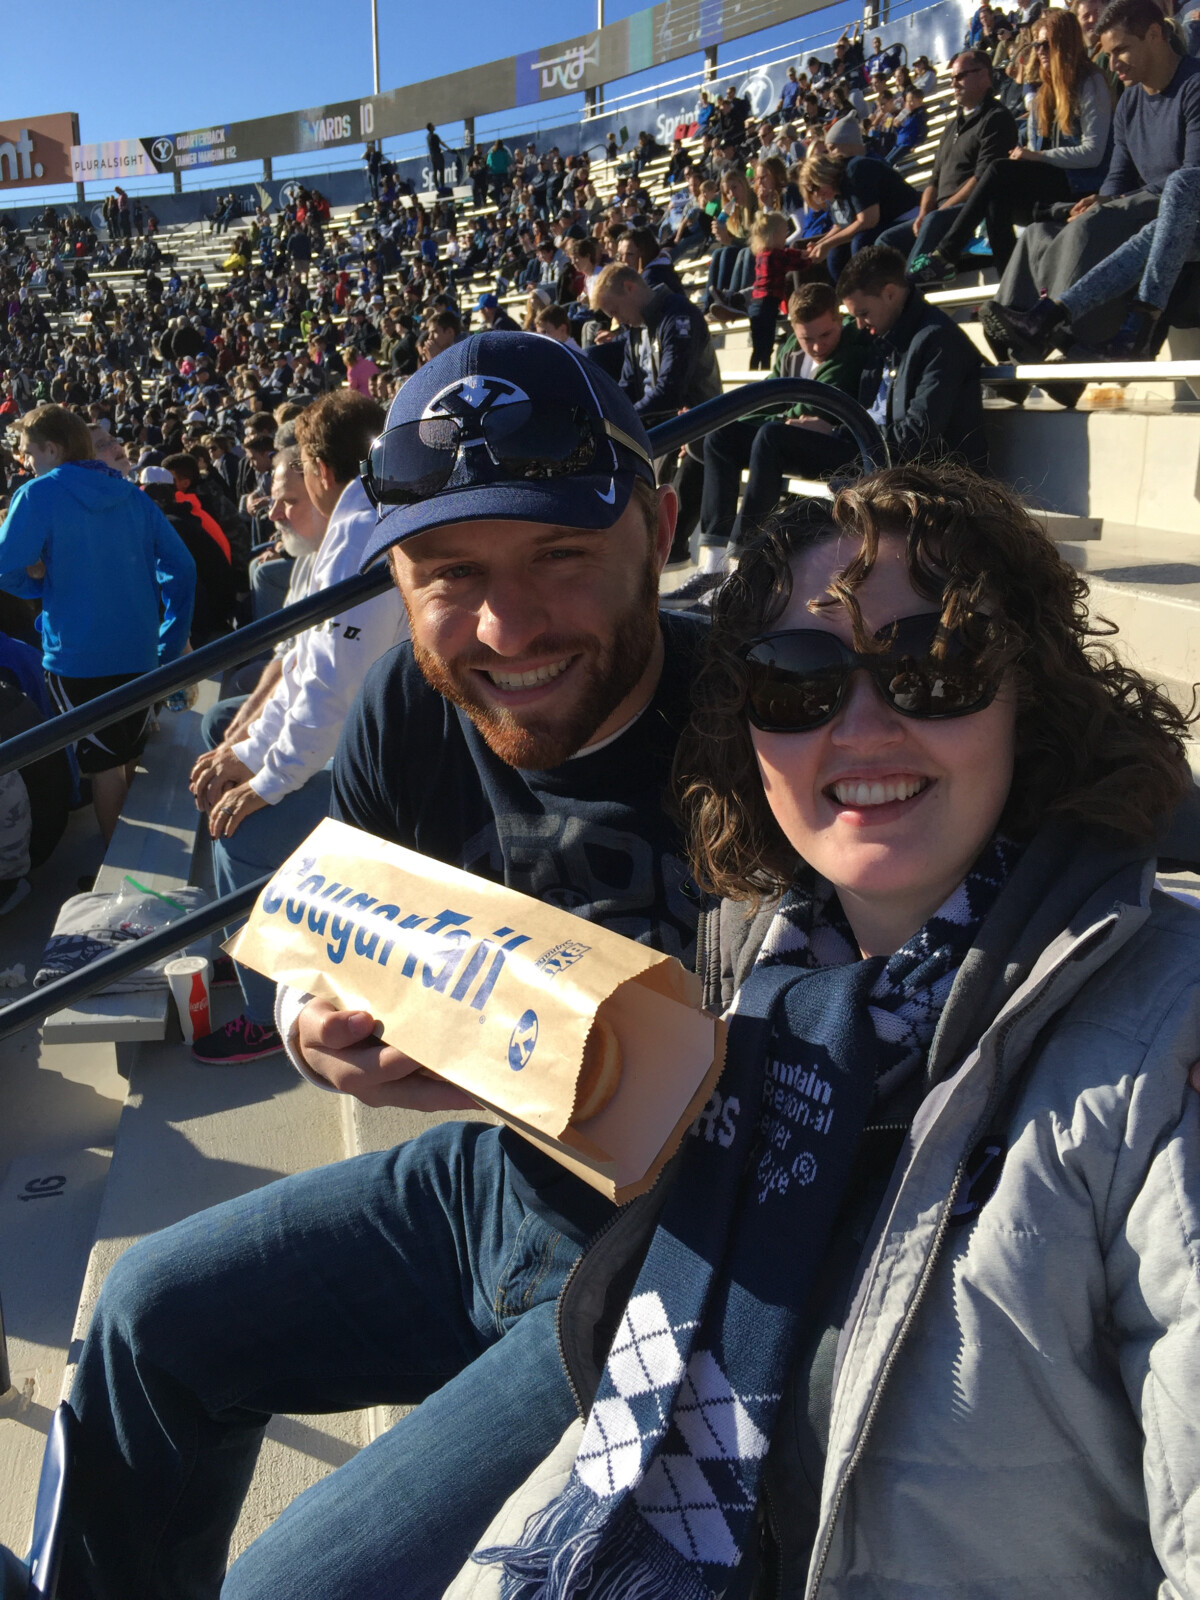 At the football game, about to devour this "cougar tail" (a footlong maple bar)